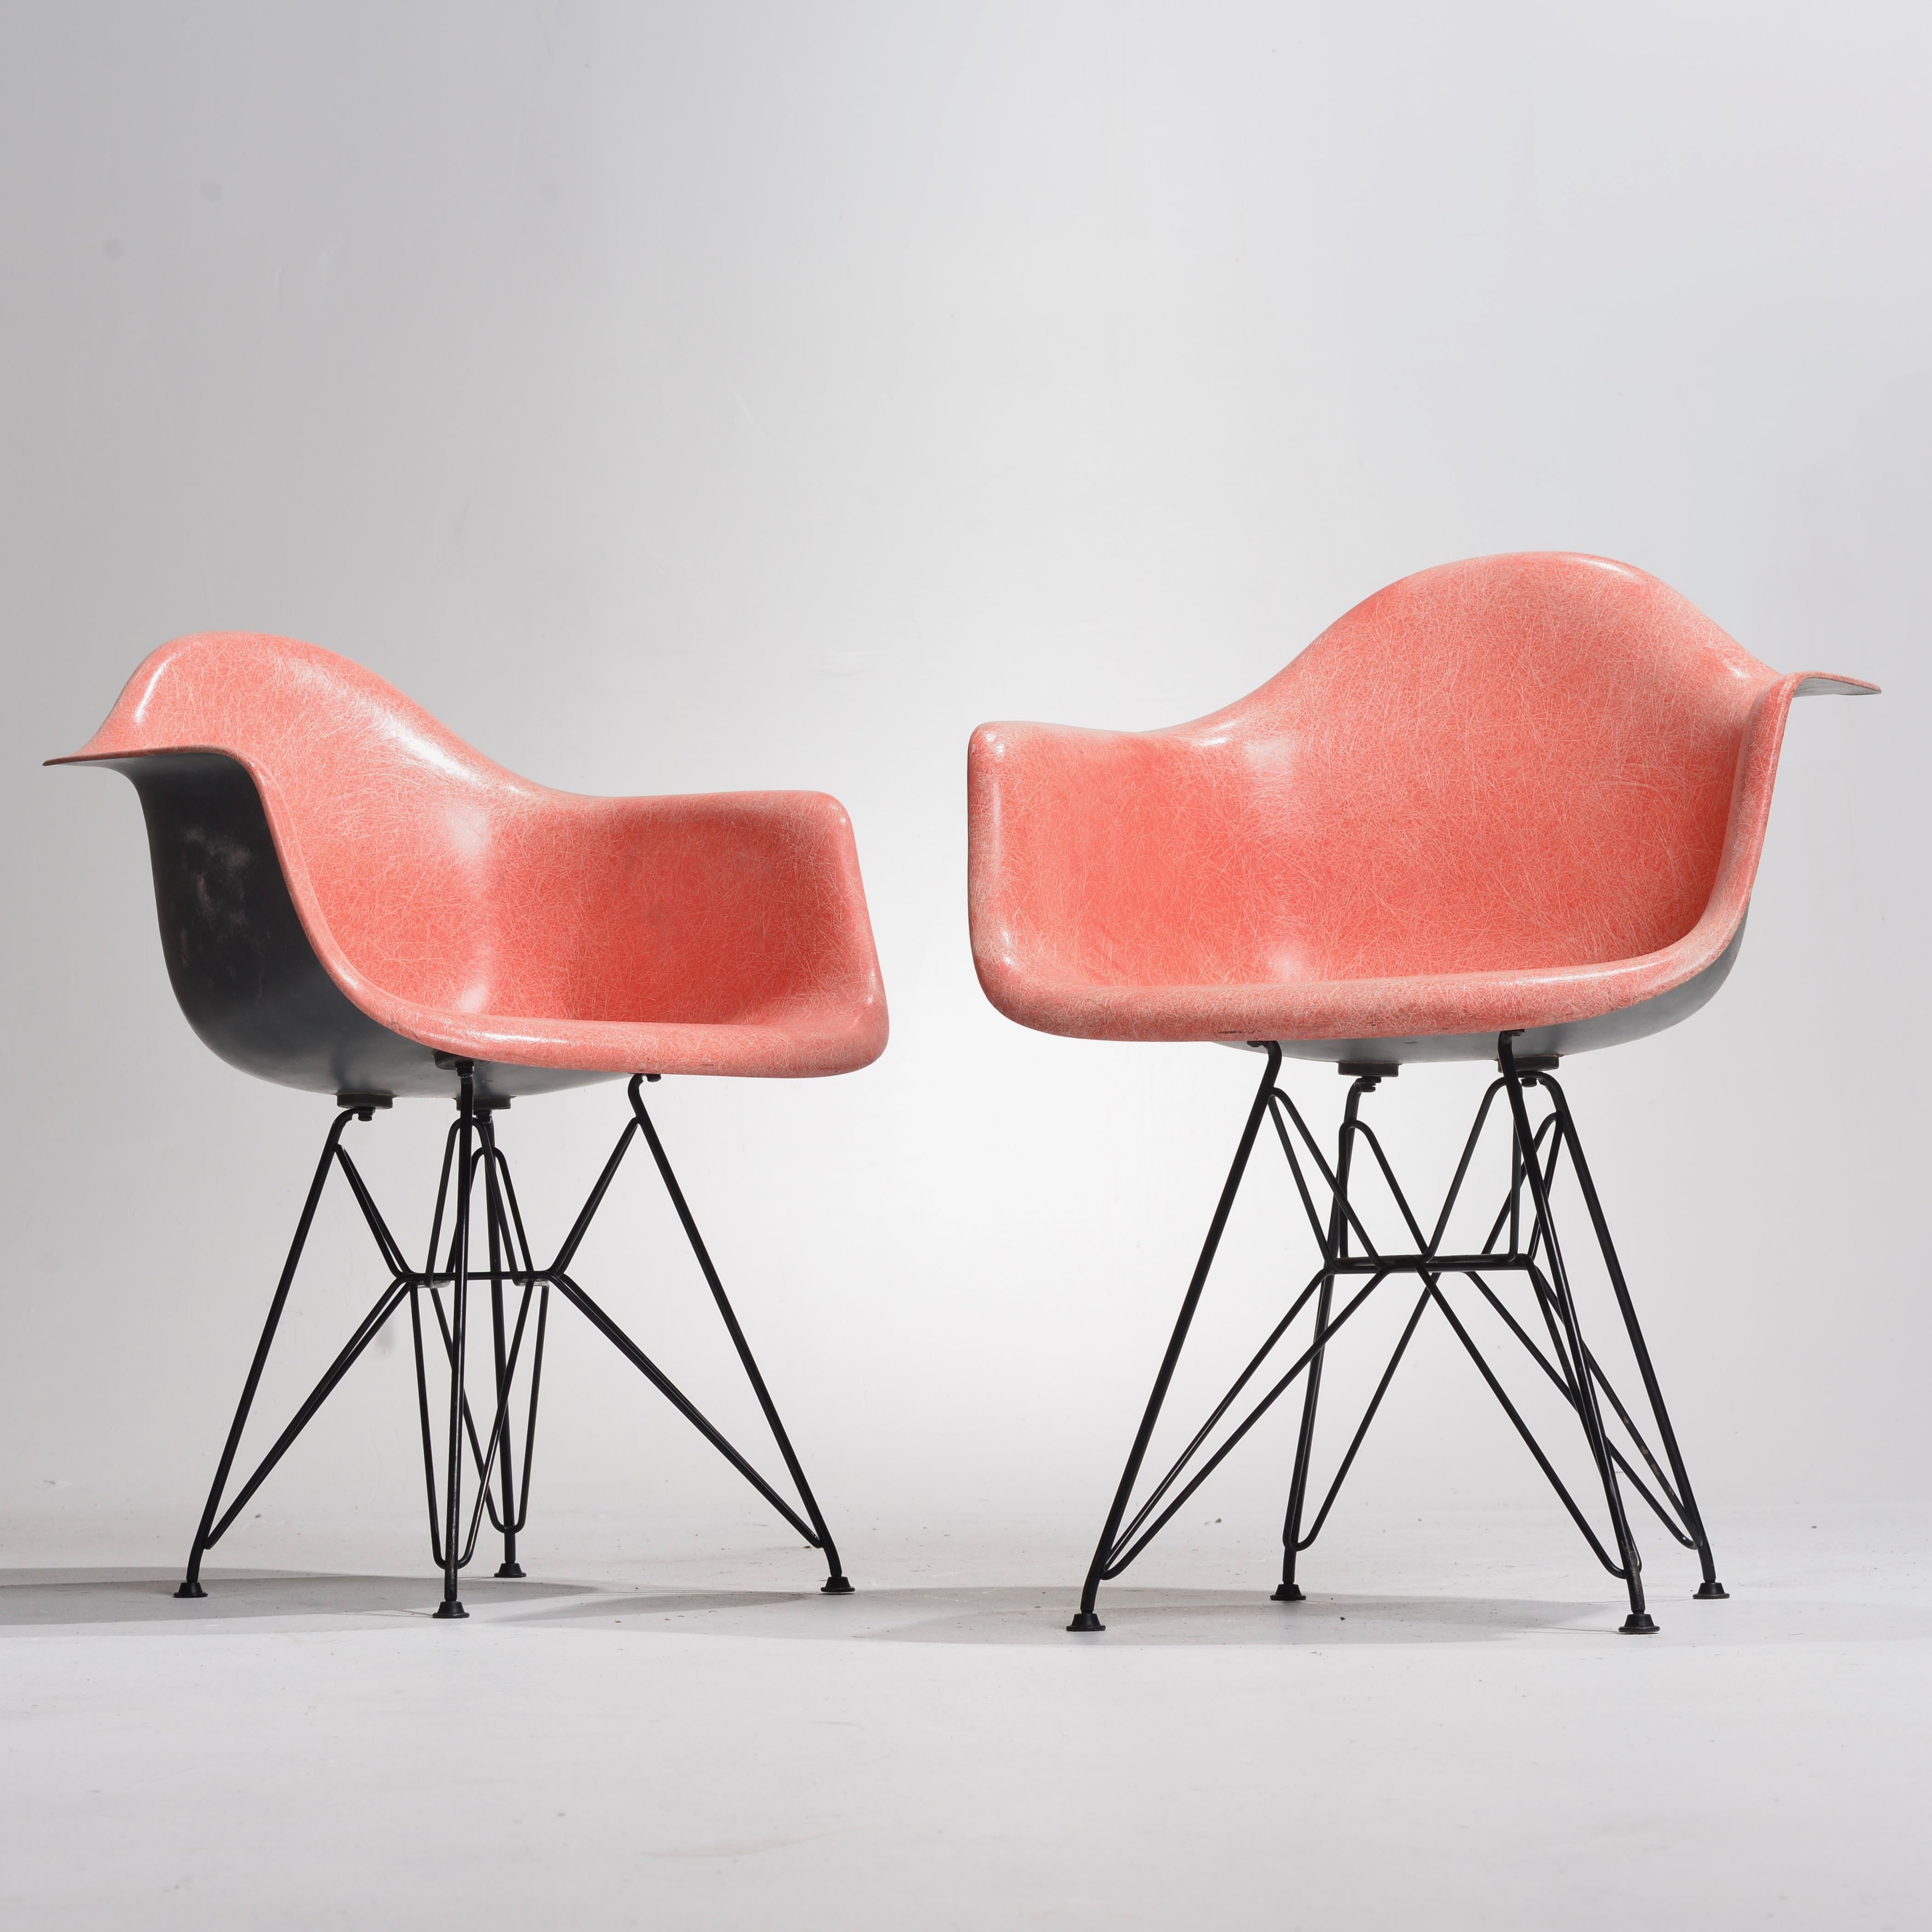 Zenith Charles Eames DAR Fiberglass Shell Chairs In Good Condition For Sale In Los Angeles, CA